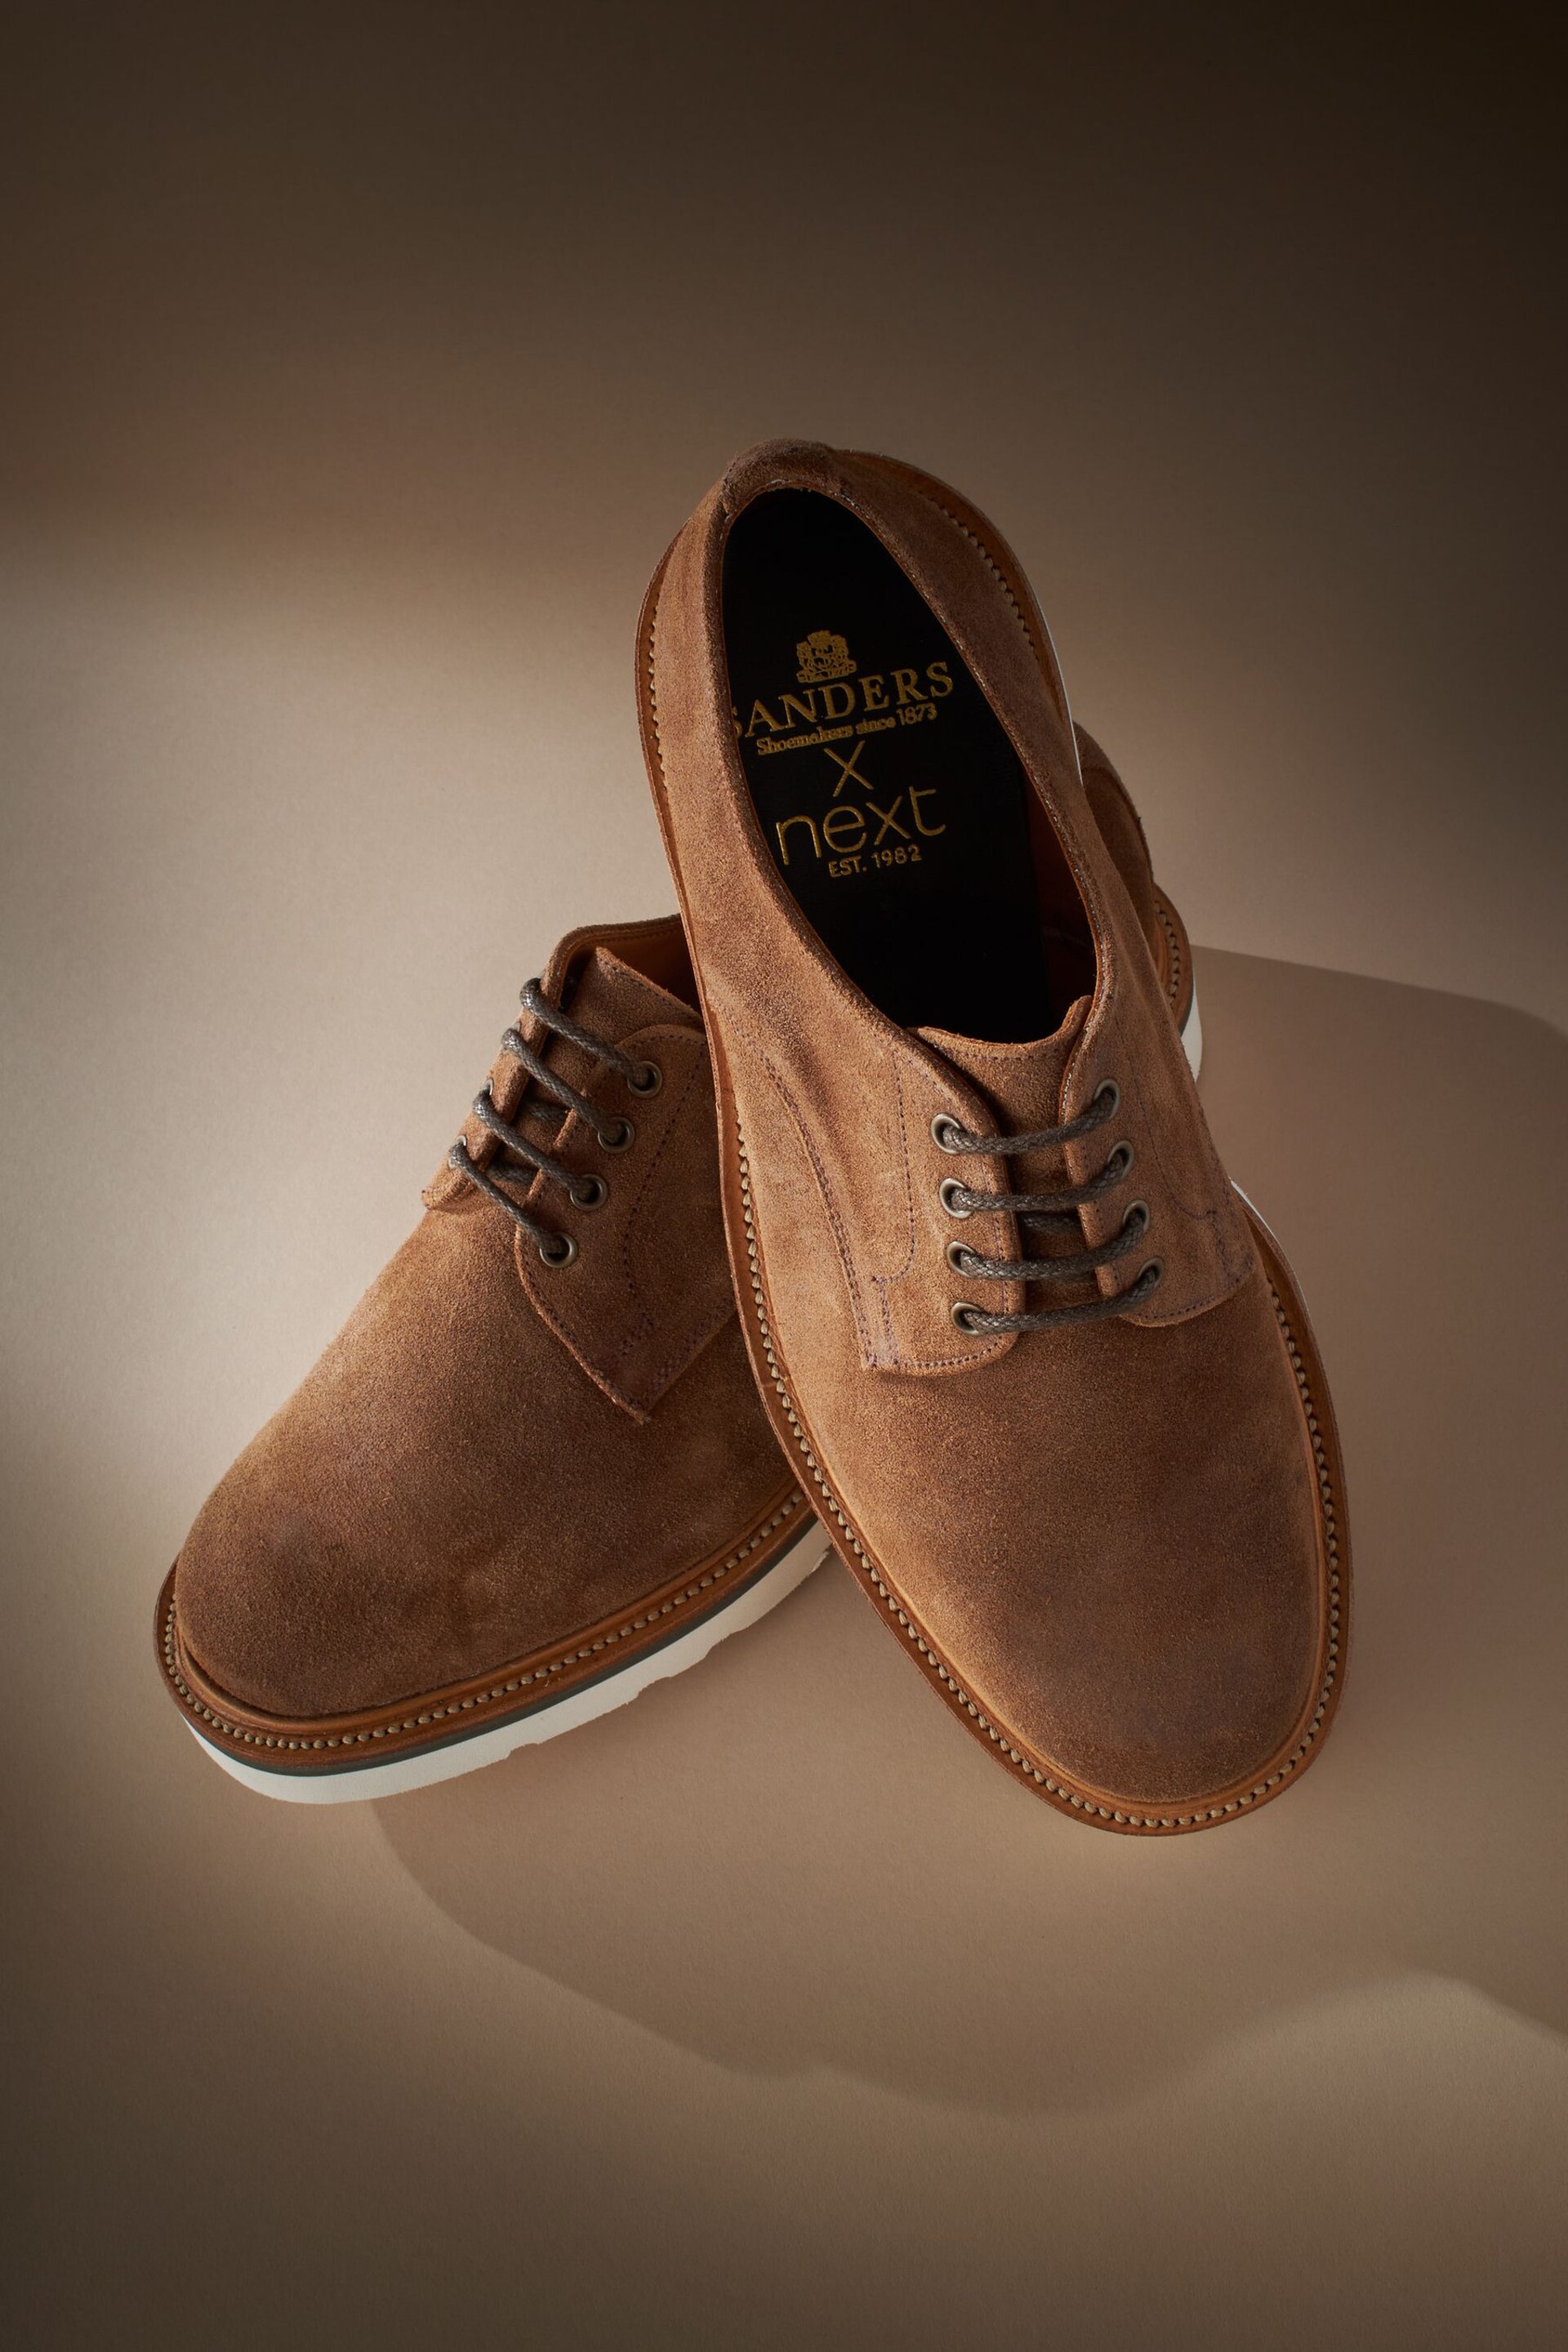 Tan Brown Suede Sanders for Next Wedge Derby Shoes - Image 5 of 7